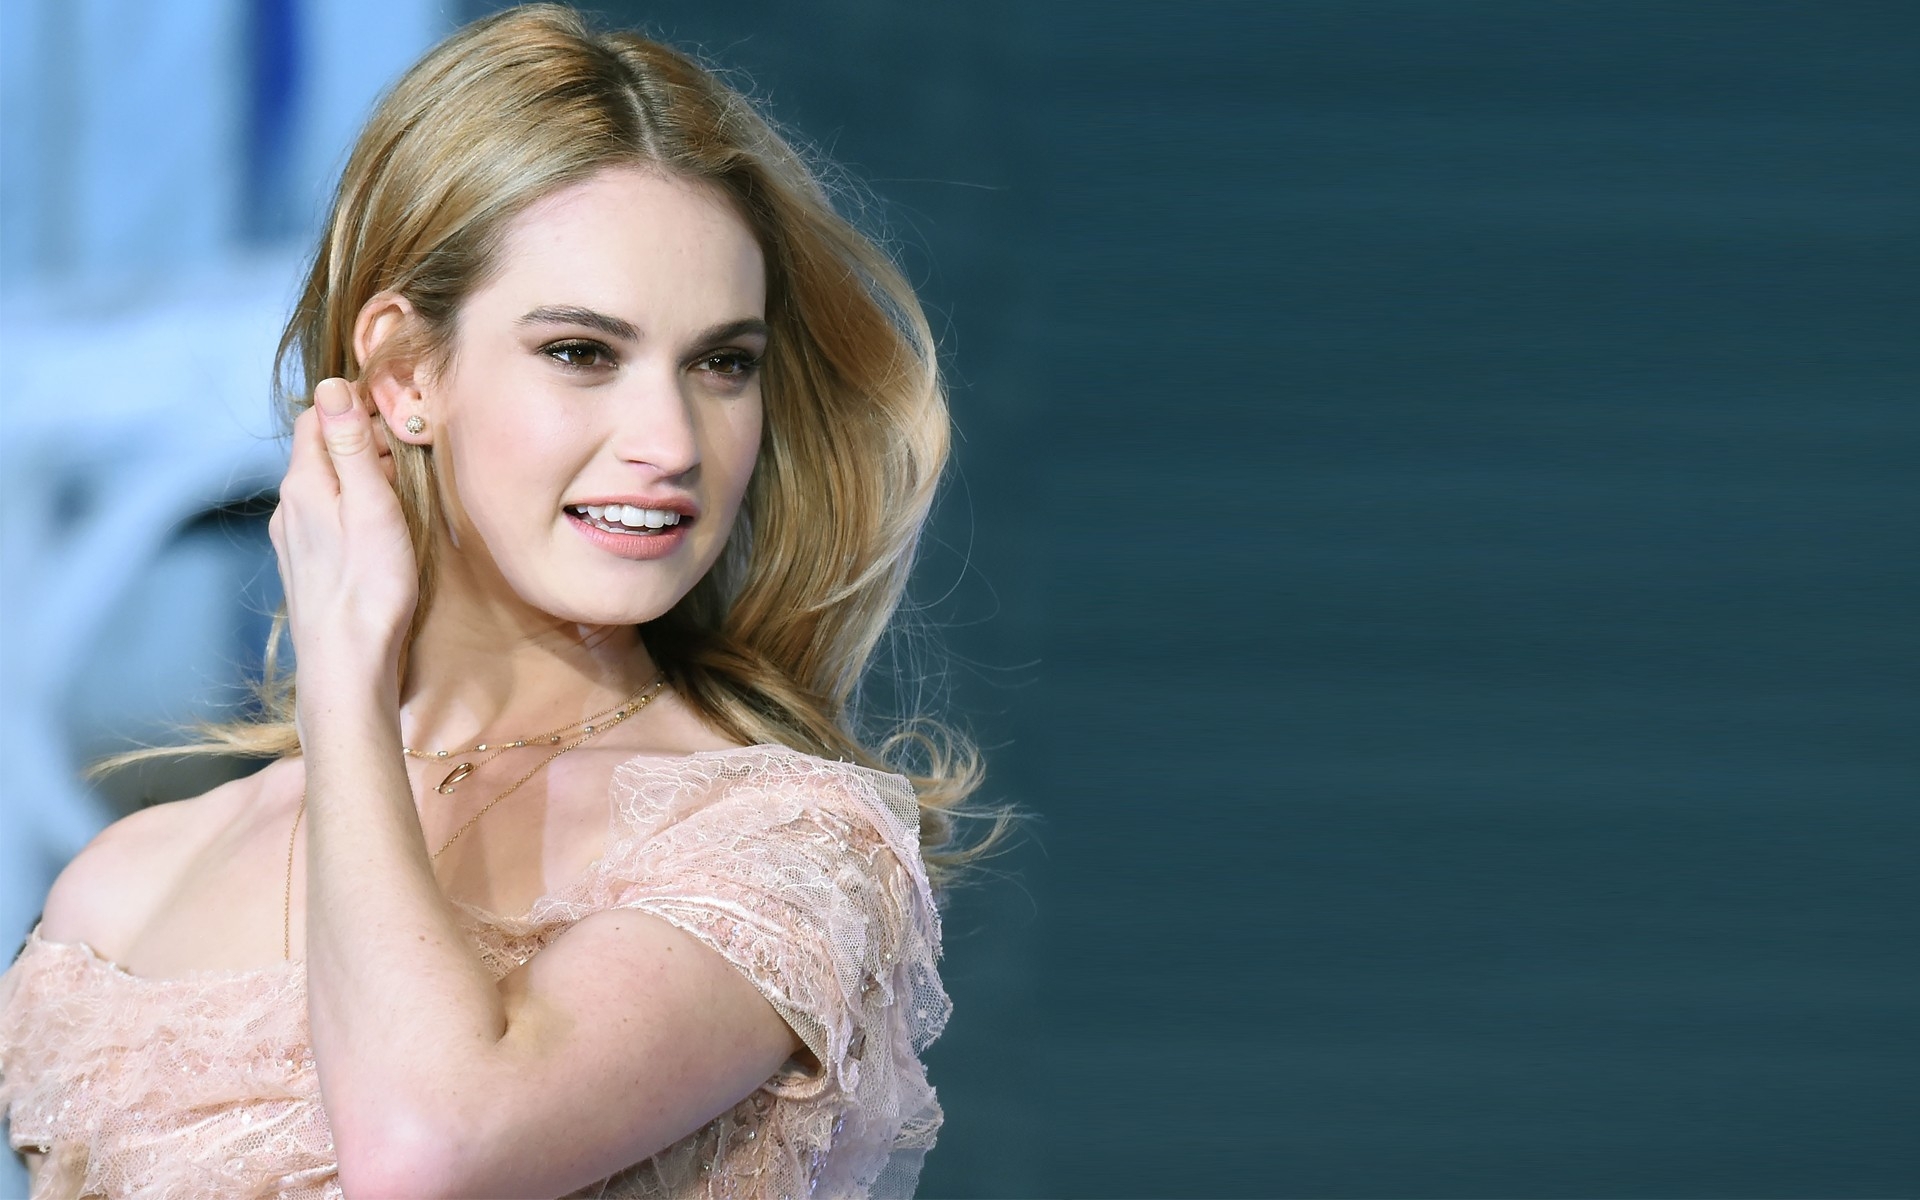 Lily James Wallpapers Images Photos Pictures Backgrounds1920 x 1200